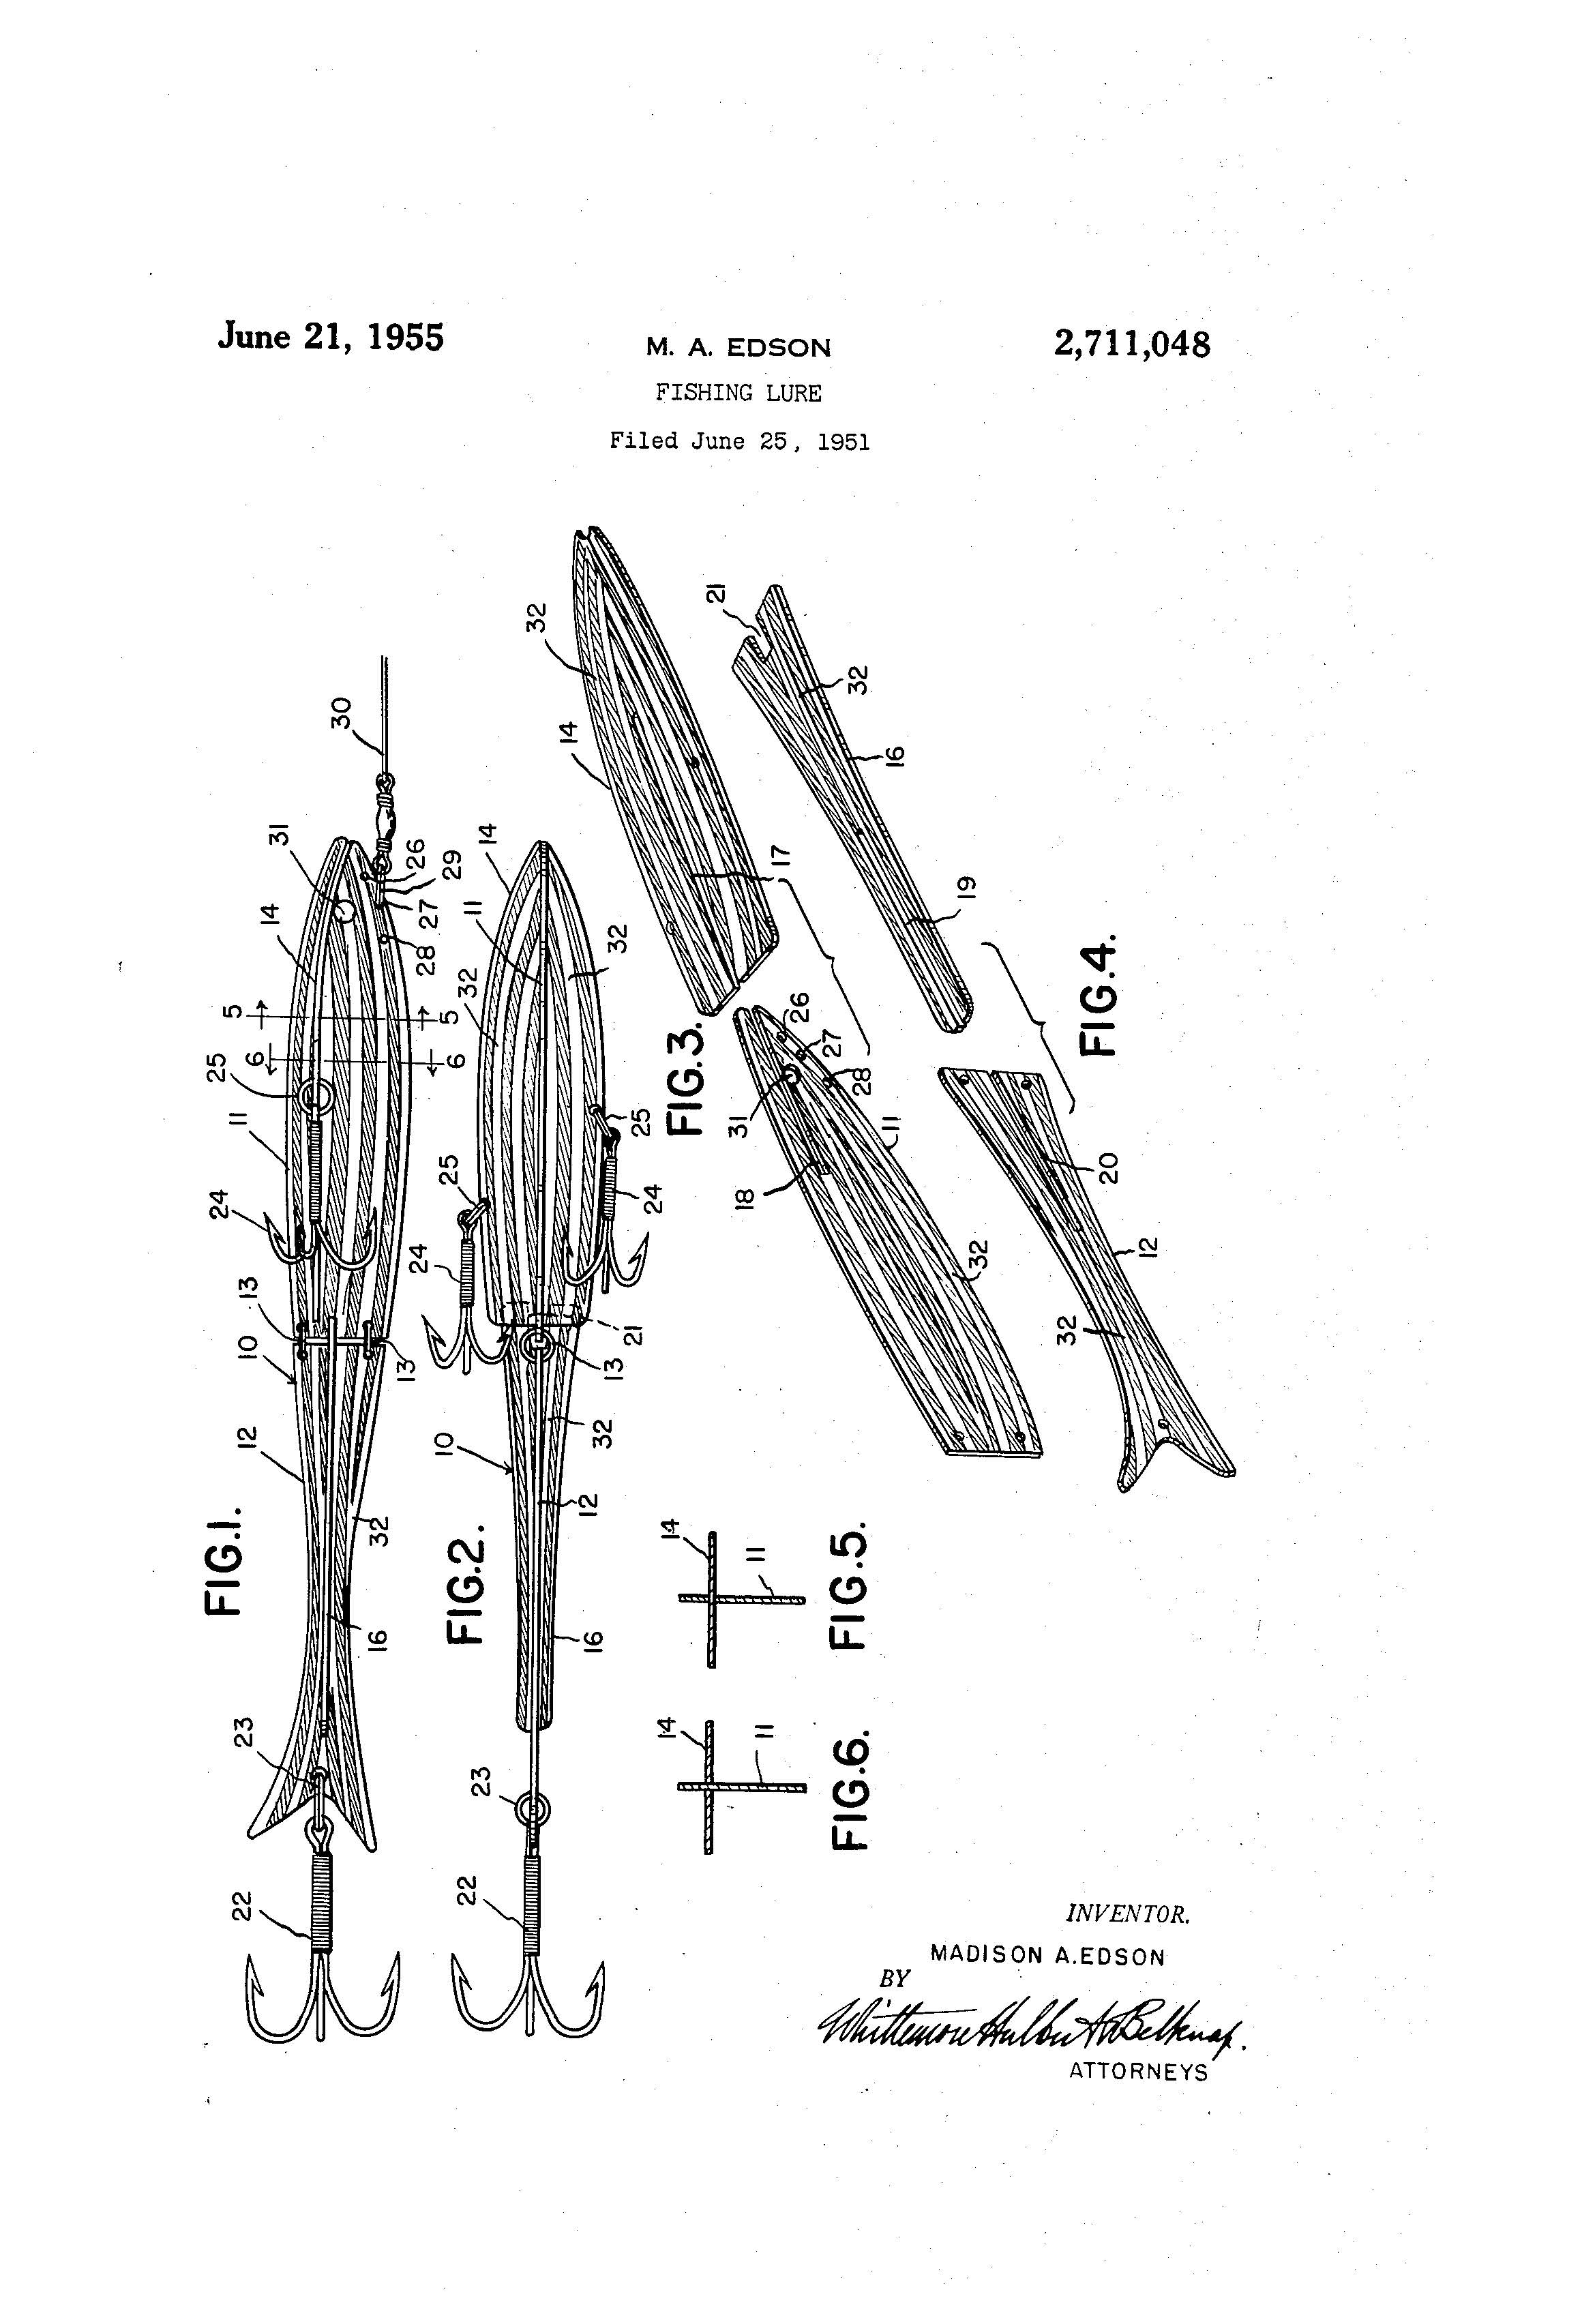 How To Patent A Fishing Lure